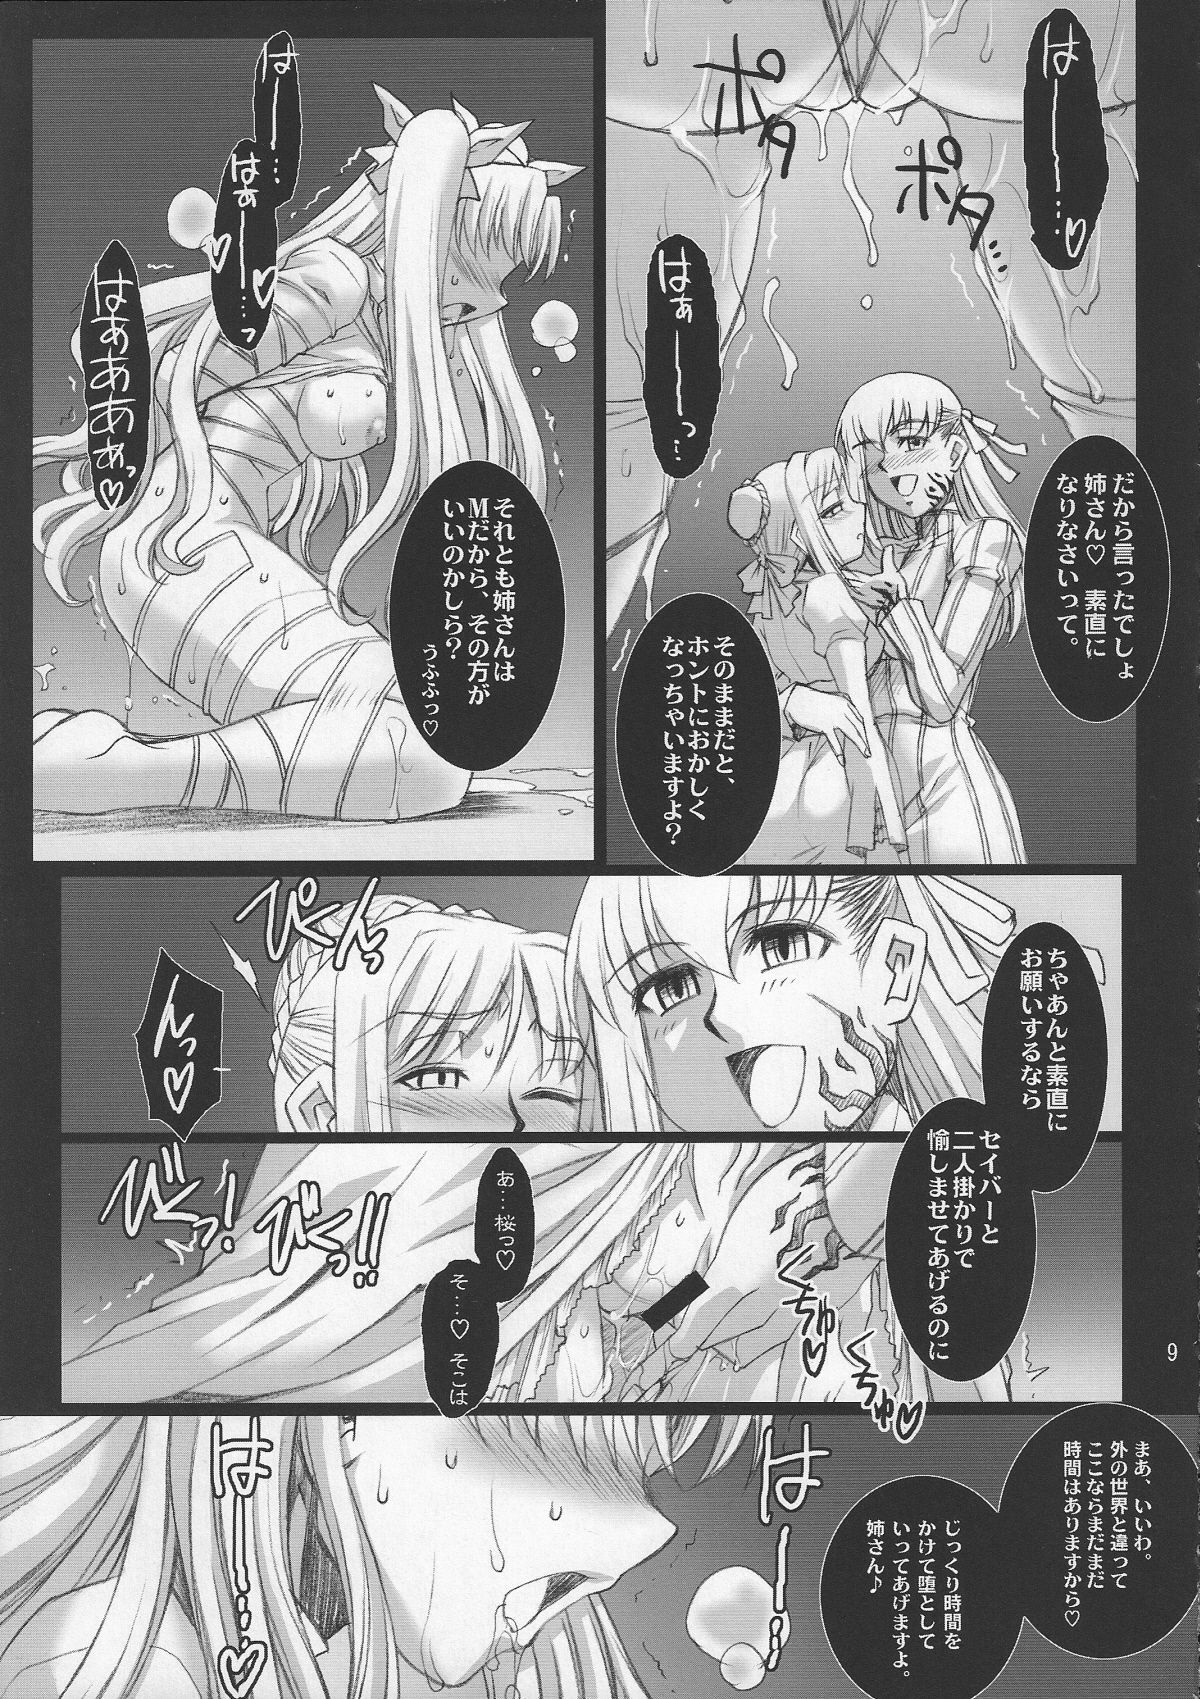 (COMIC1☆2) [H.B (B-RIVER)] Red Degeneration -DAY/3- (Fate/stay night) page 8 full